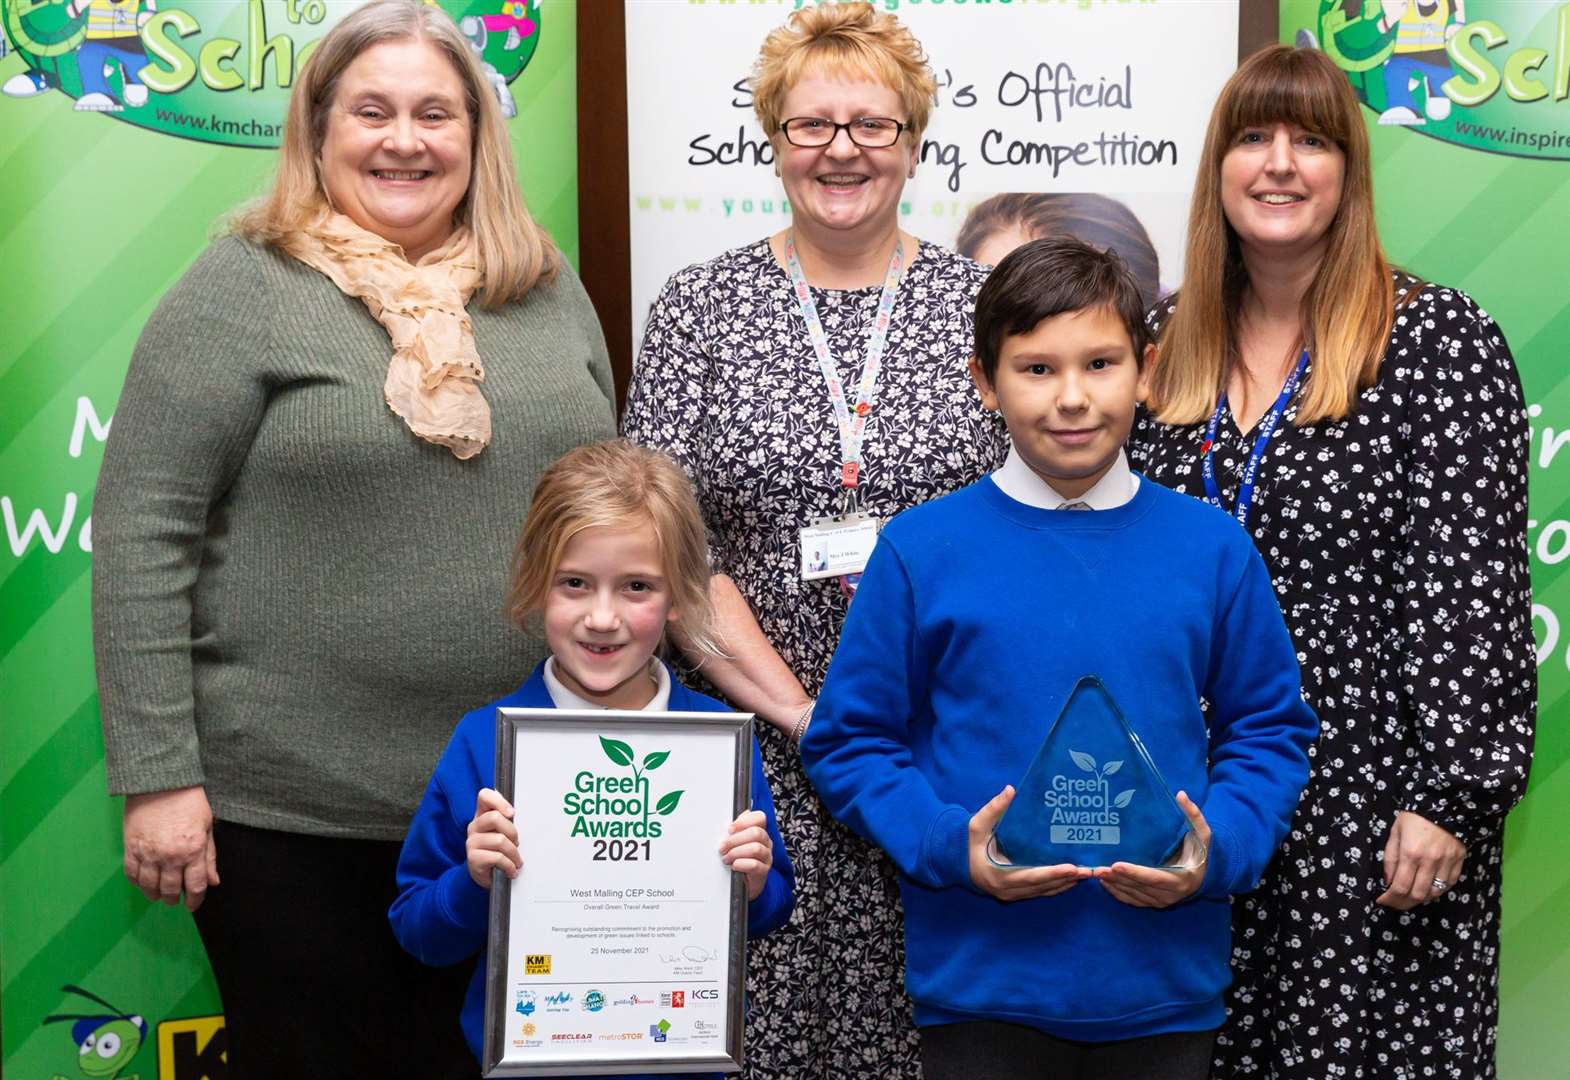 Green Travel Award went toWest Malling CEP School at the Kent Green School Awards Picture: Countrywide Photographic